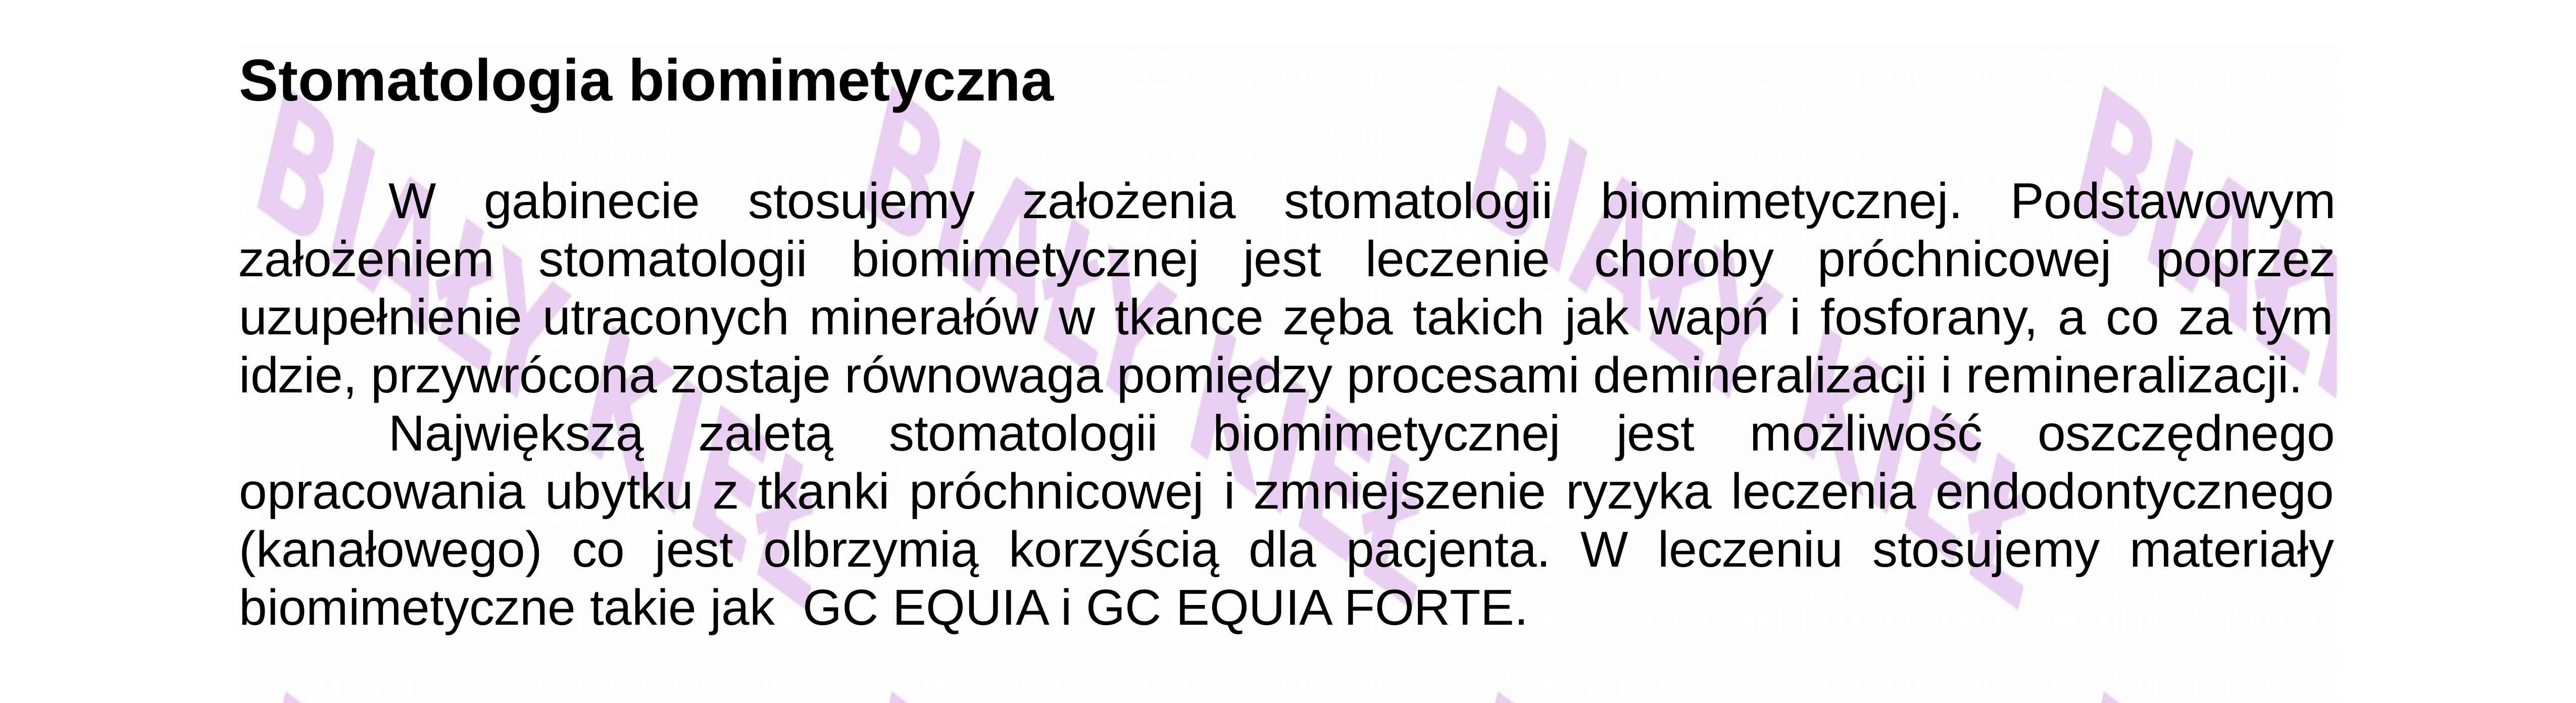 stomatologia biomimetyczna article did not pop up